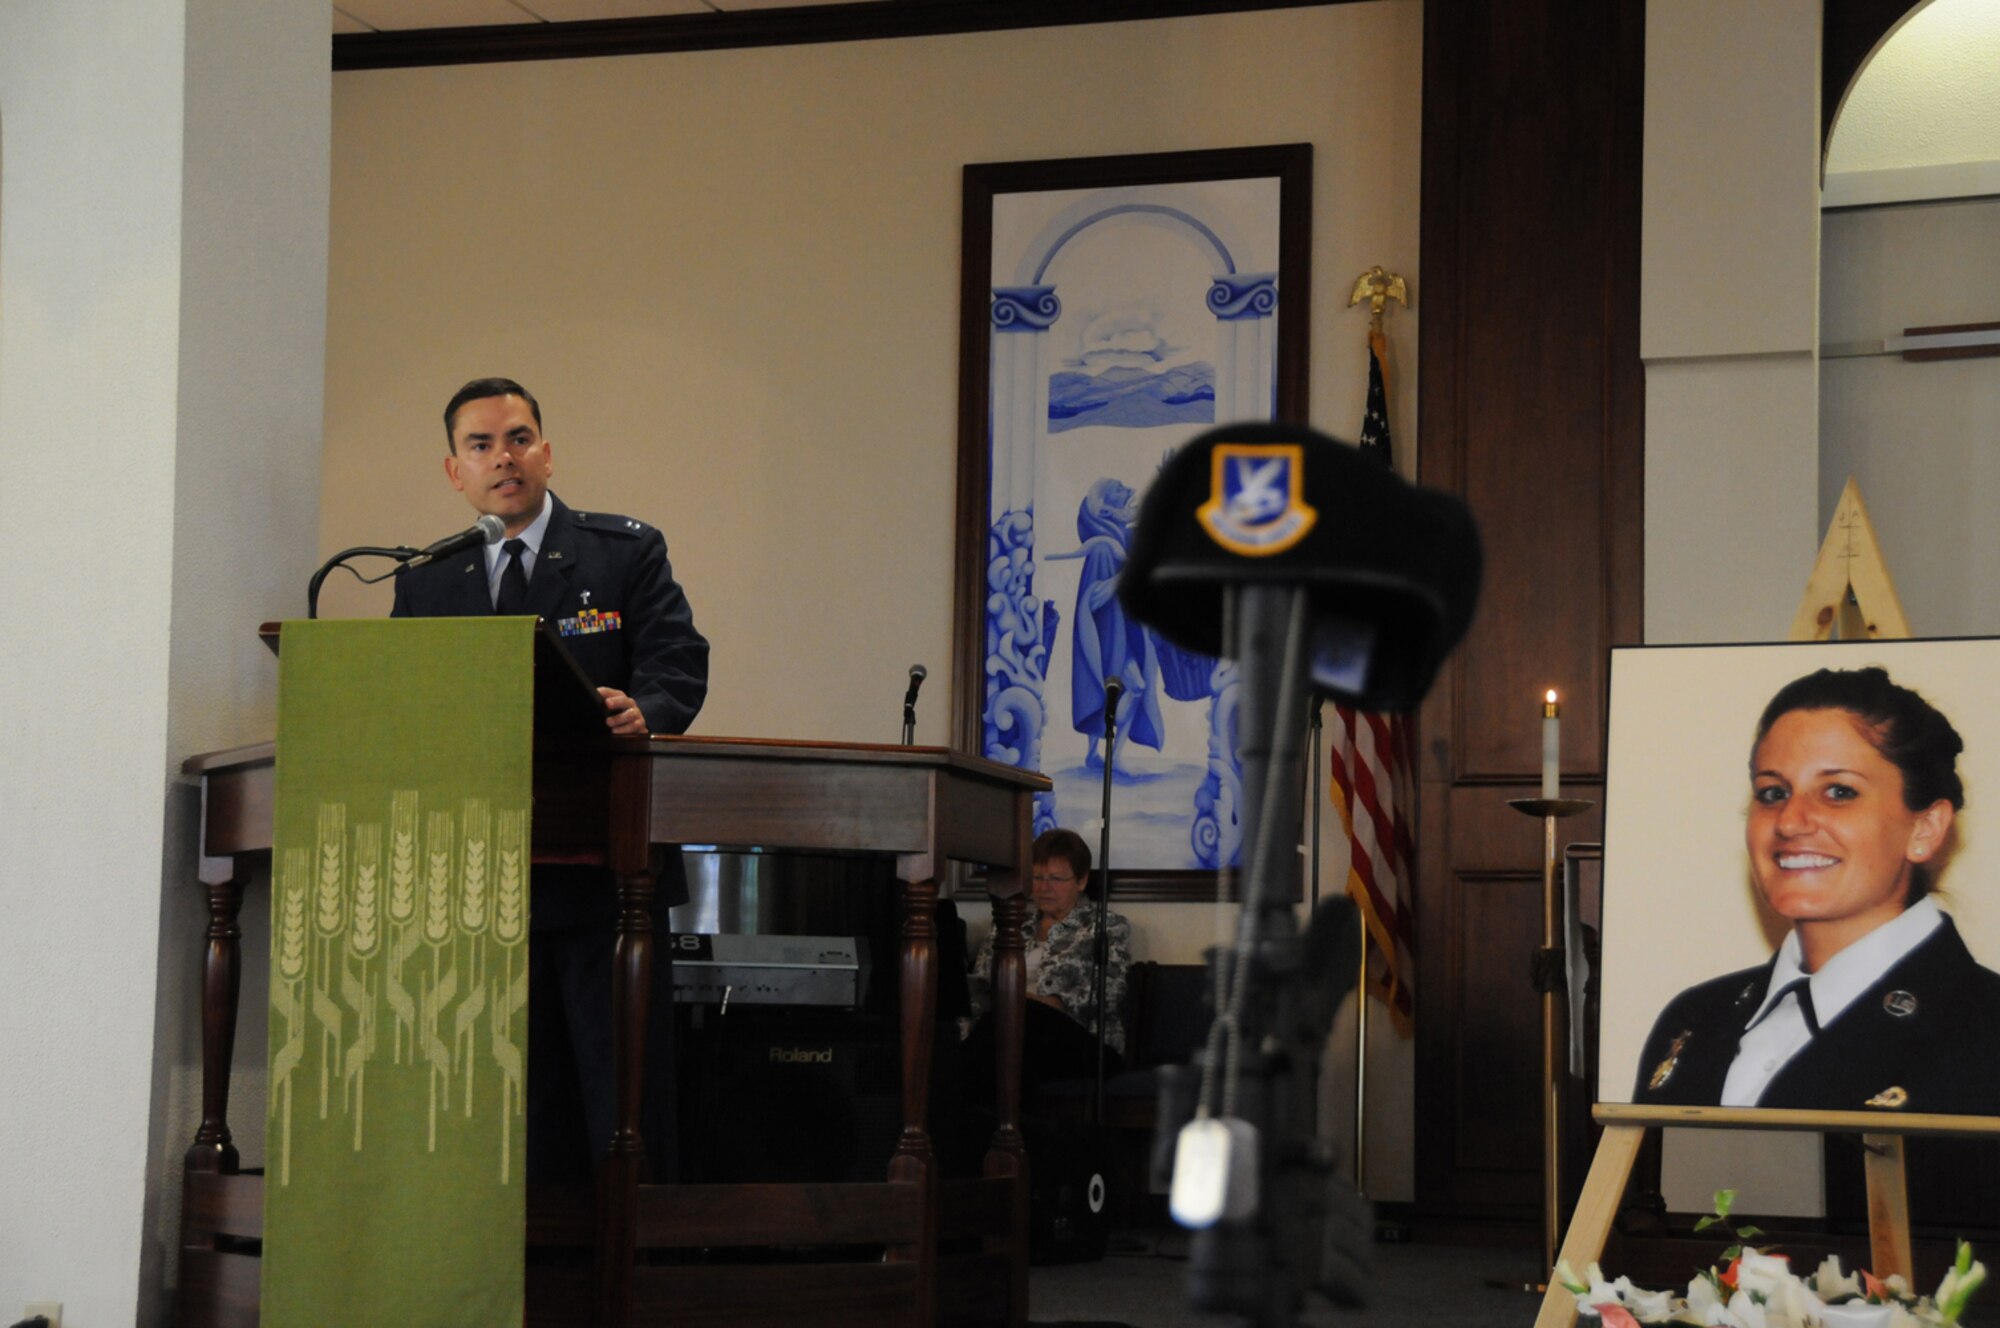 Chaplain (Capt.) Ismael Rodriguez, 65th Air Base Wing chapel, gives the invocation at the memorial service in honor of Senior Airman Amber Finnell at Lajes Field July 2. Airman Finnell was from East Tawas, Mich. and entered the Air Force in Feb. 2004.  She had been previously stationed at Minot AFB, N.D. and Sather AB, Baghdad, Iraq; she passed away on June 30, 2009.  (U.S. Air Force photo by Tech Sgt. Rebecca F. Corey)